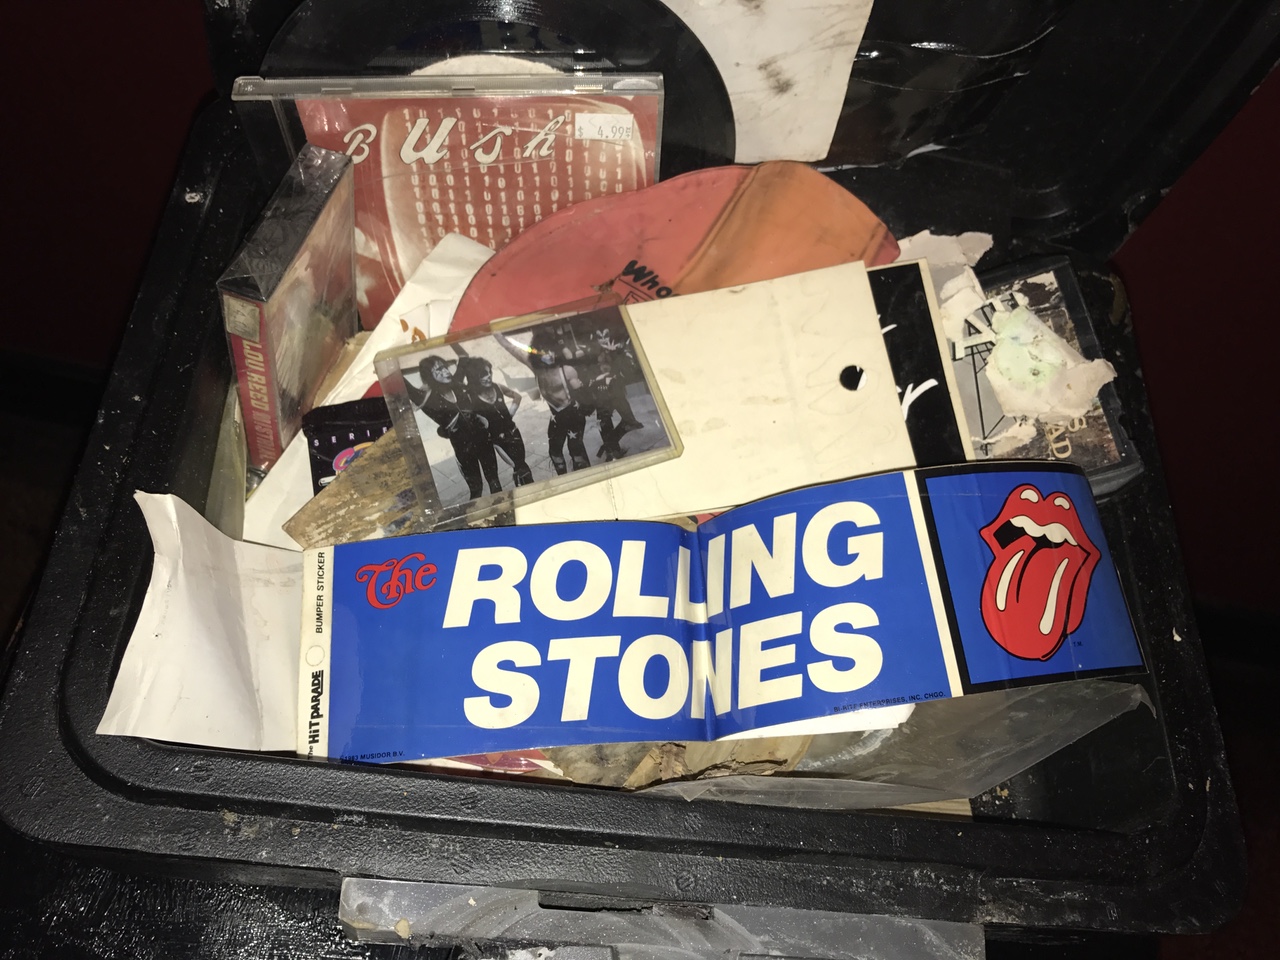 Music Memorabilia Time Capsule Opened Prematurely, Which Is No Big Deal Because It Happens To A Lot Of Guys